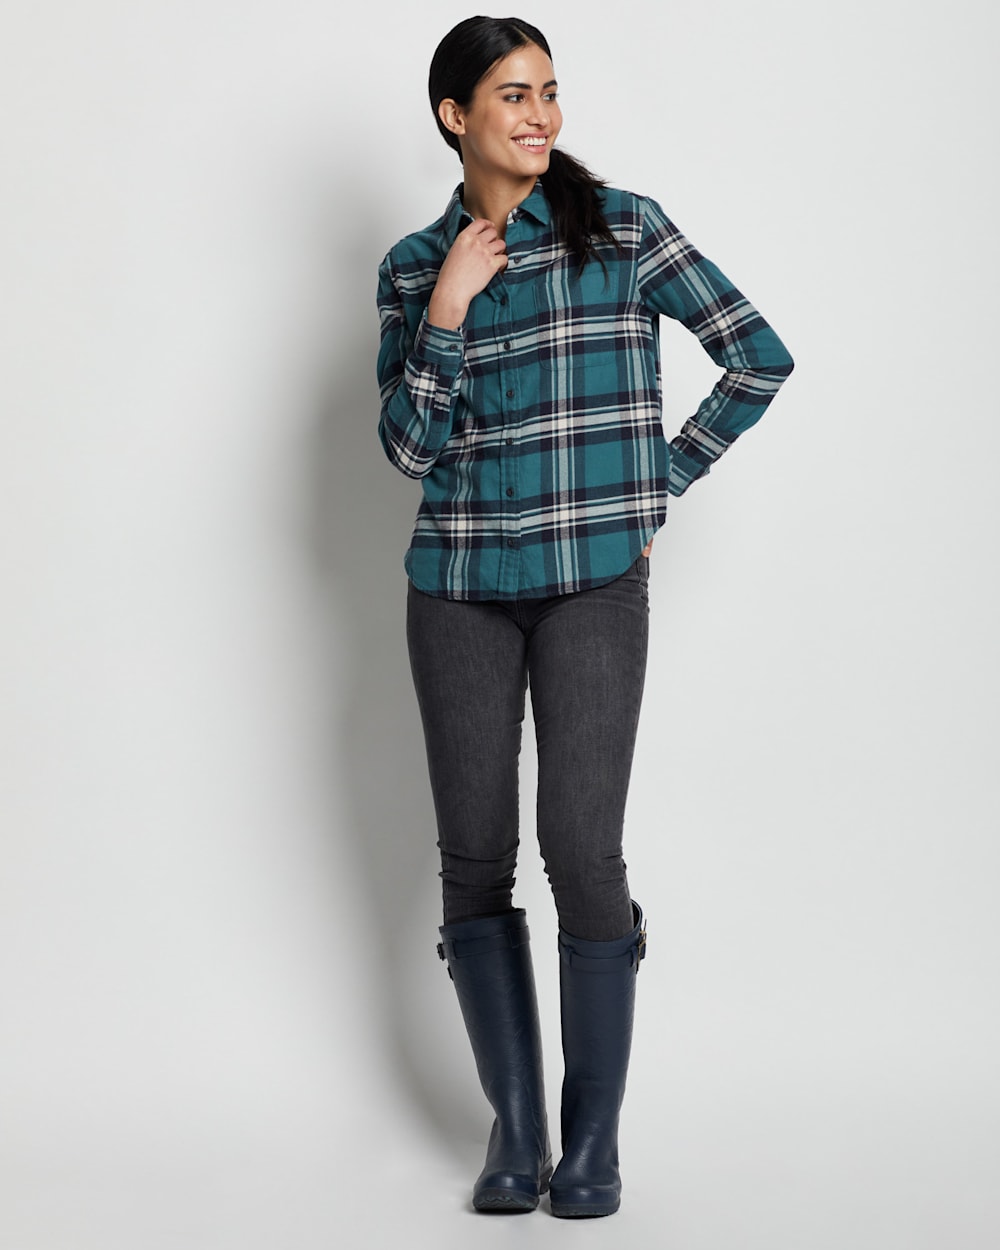 ALTERNATE VIEW OF WOMEN'S BOYFRIEND DOUBLEBRUSHED FLANNEL SHIRT IN BALSAM/IVORY PLAID image number 3